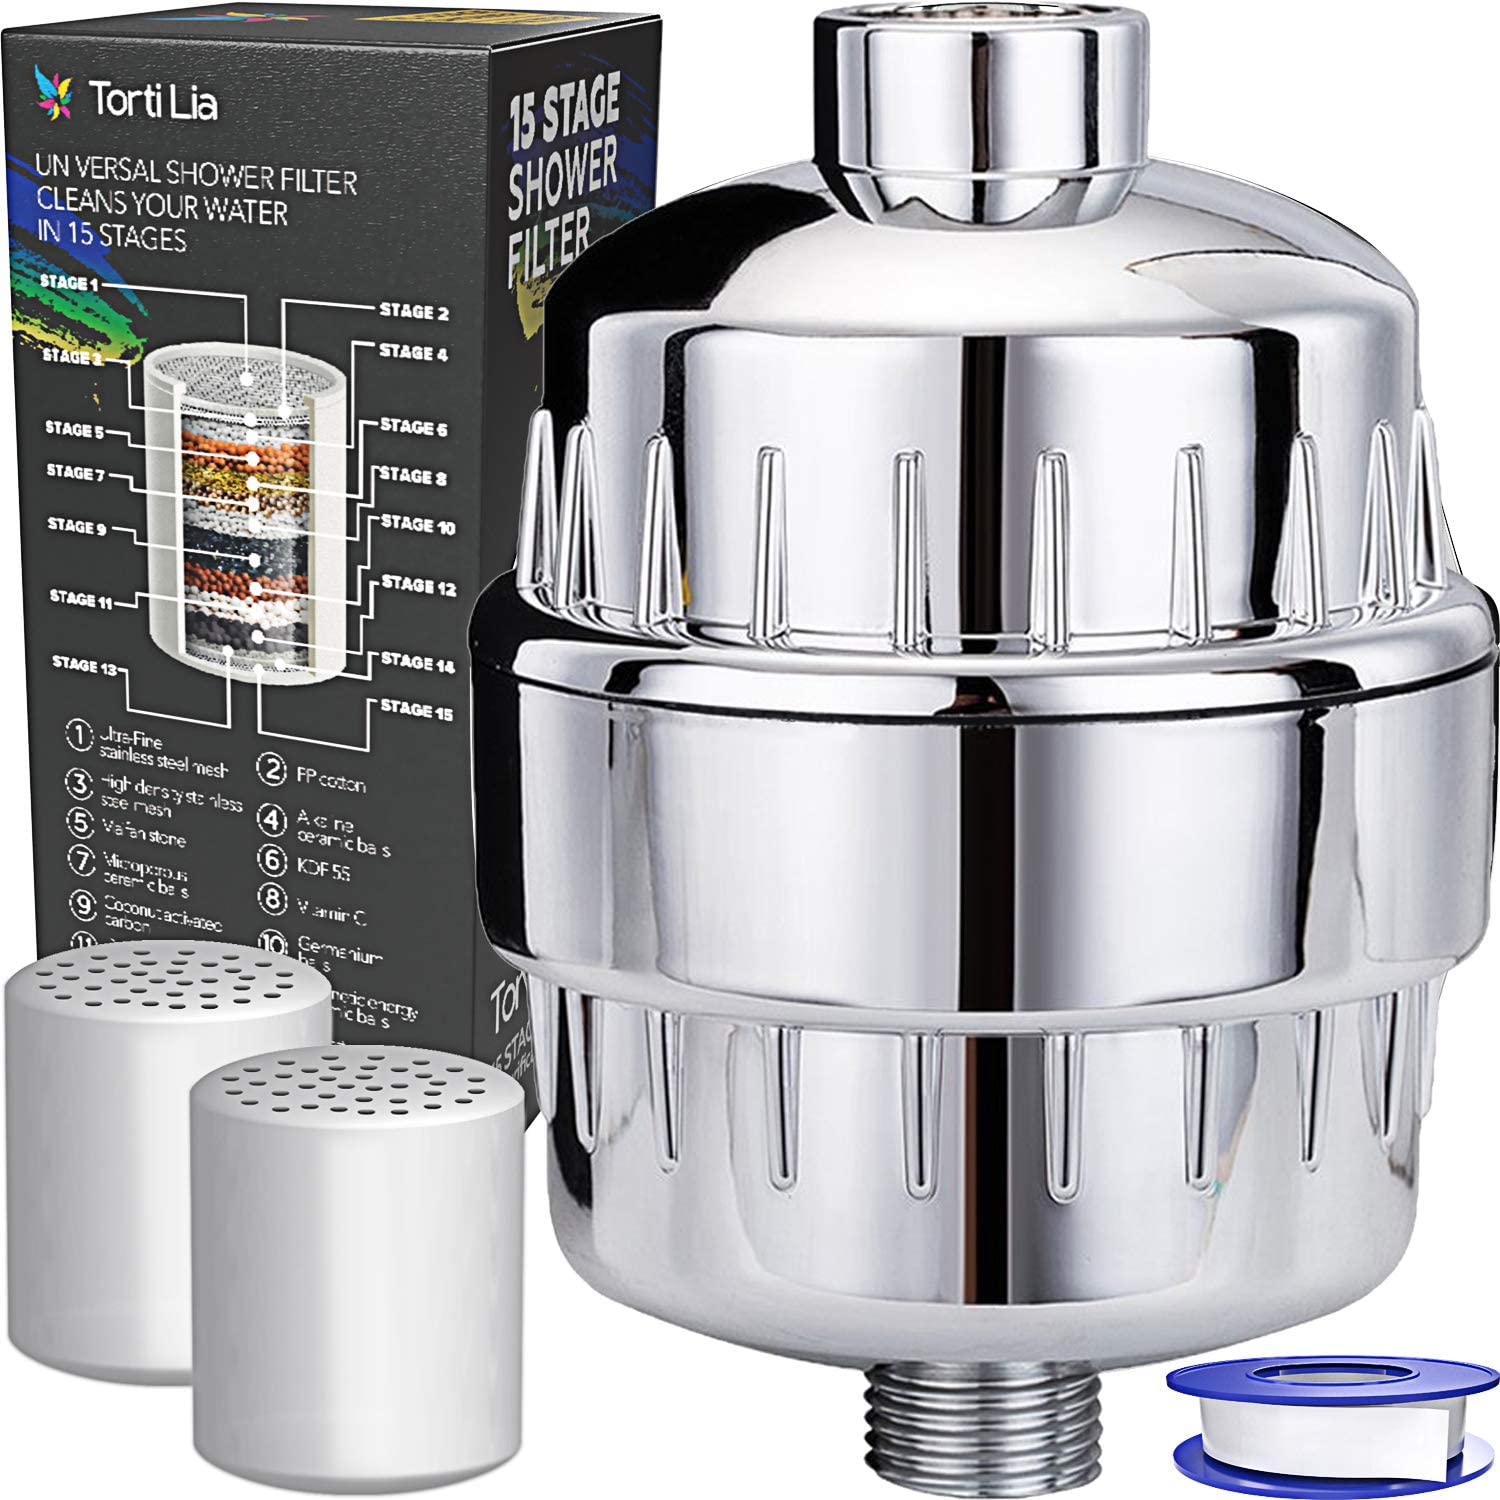 Torti Lia 15 Stage Shower Filter with Vitamin C For Hard Water